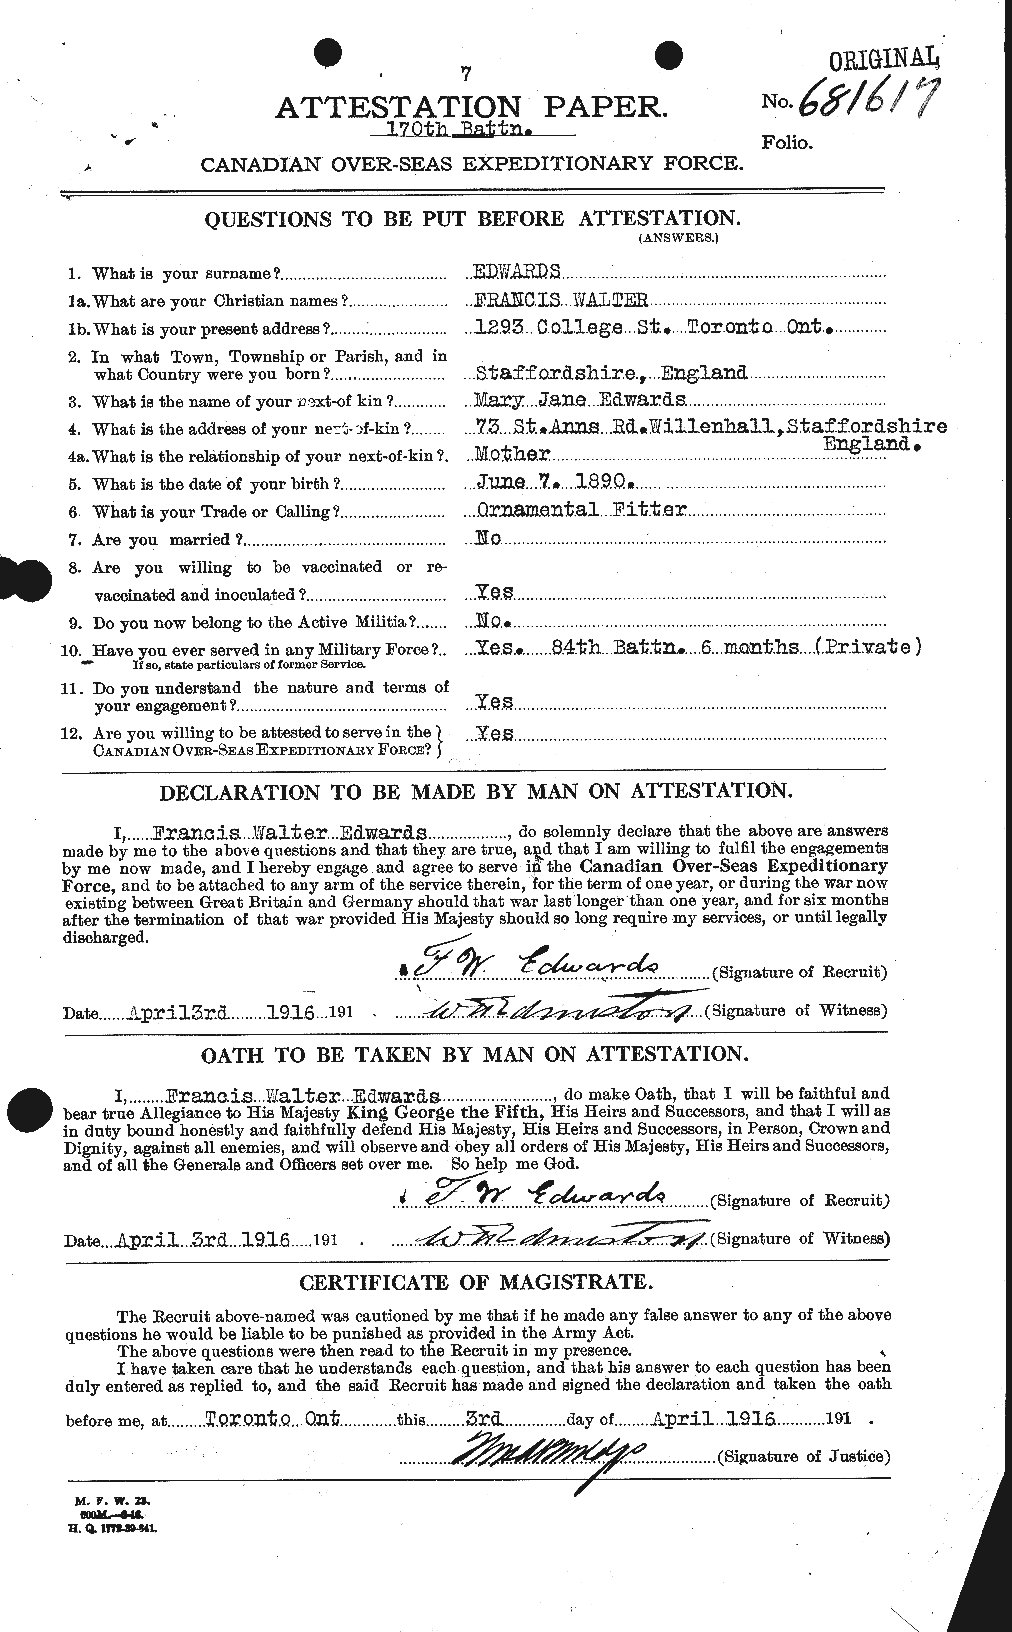 Personnel Records of the First World War - CEF 309037a